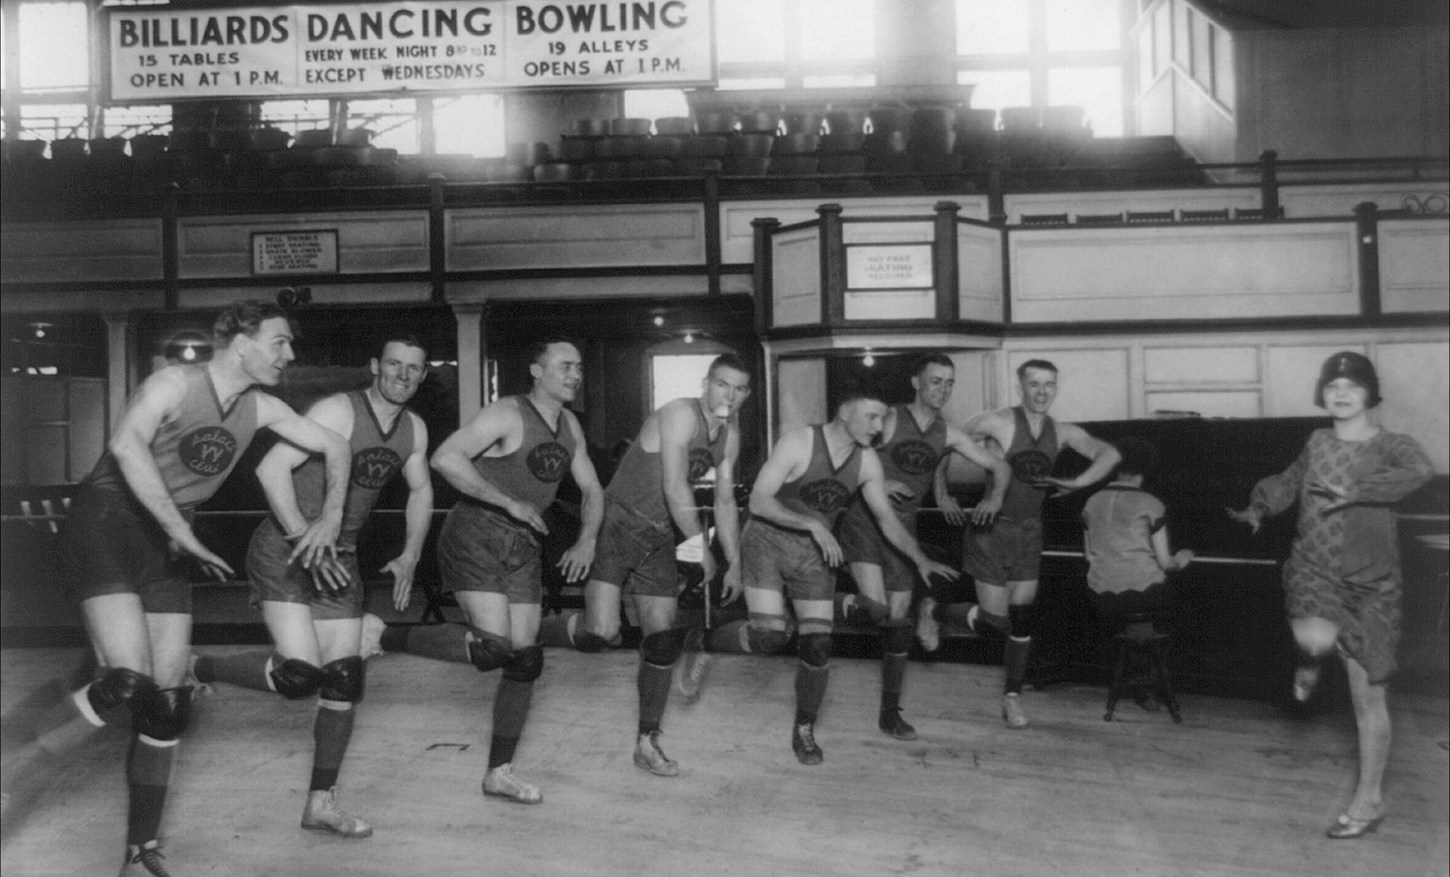 UNITED STATES - CIRCA 1900: Dance Lessons for the Palace Club Basketball Team.